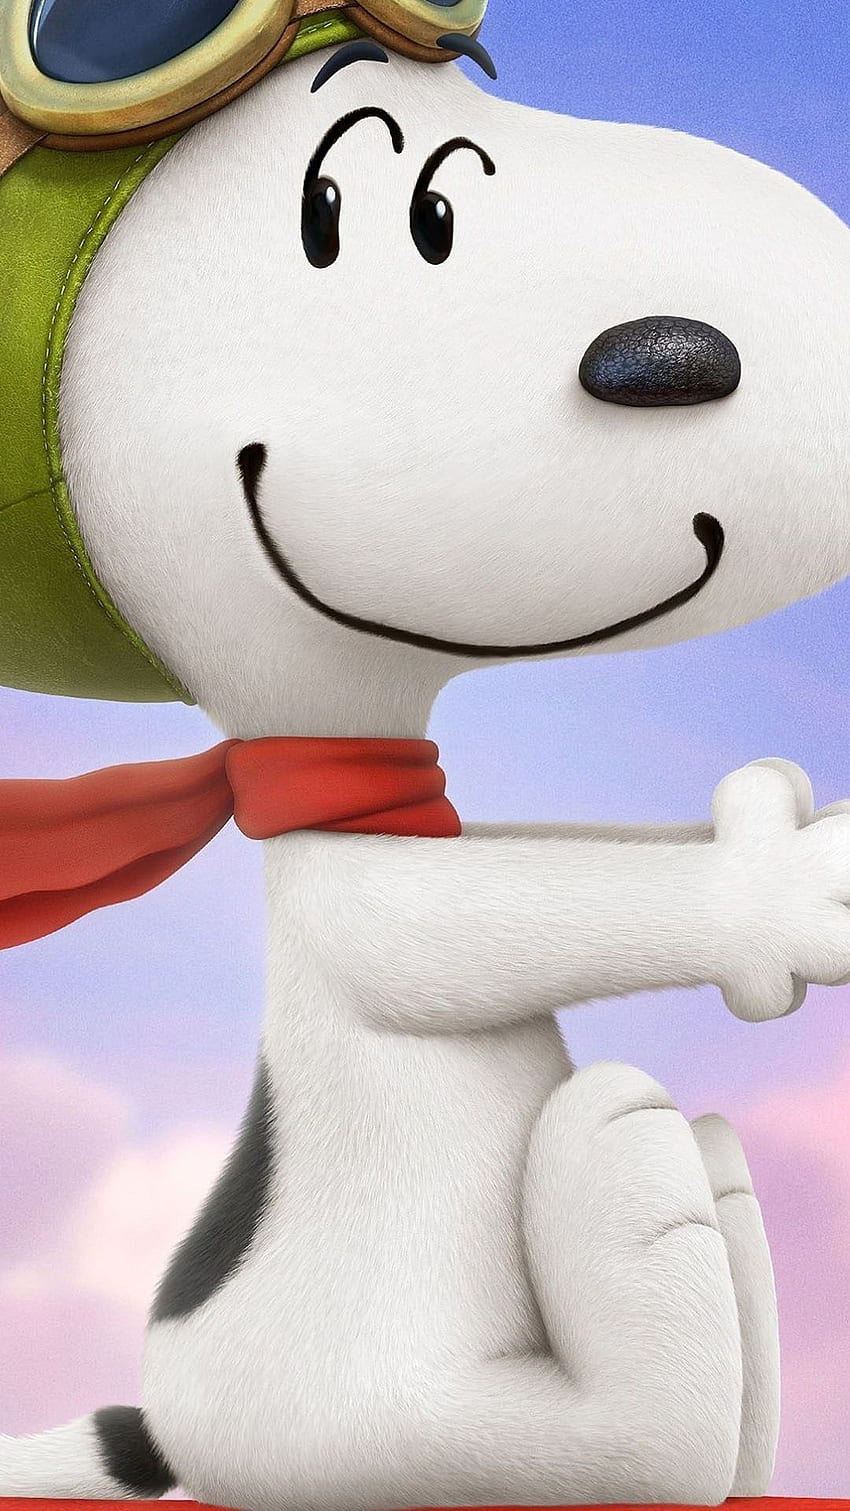 Peanuts Snoopy IPhone 6 6 Plus And IPhone 5 4 HD phone wallpaper